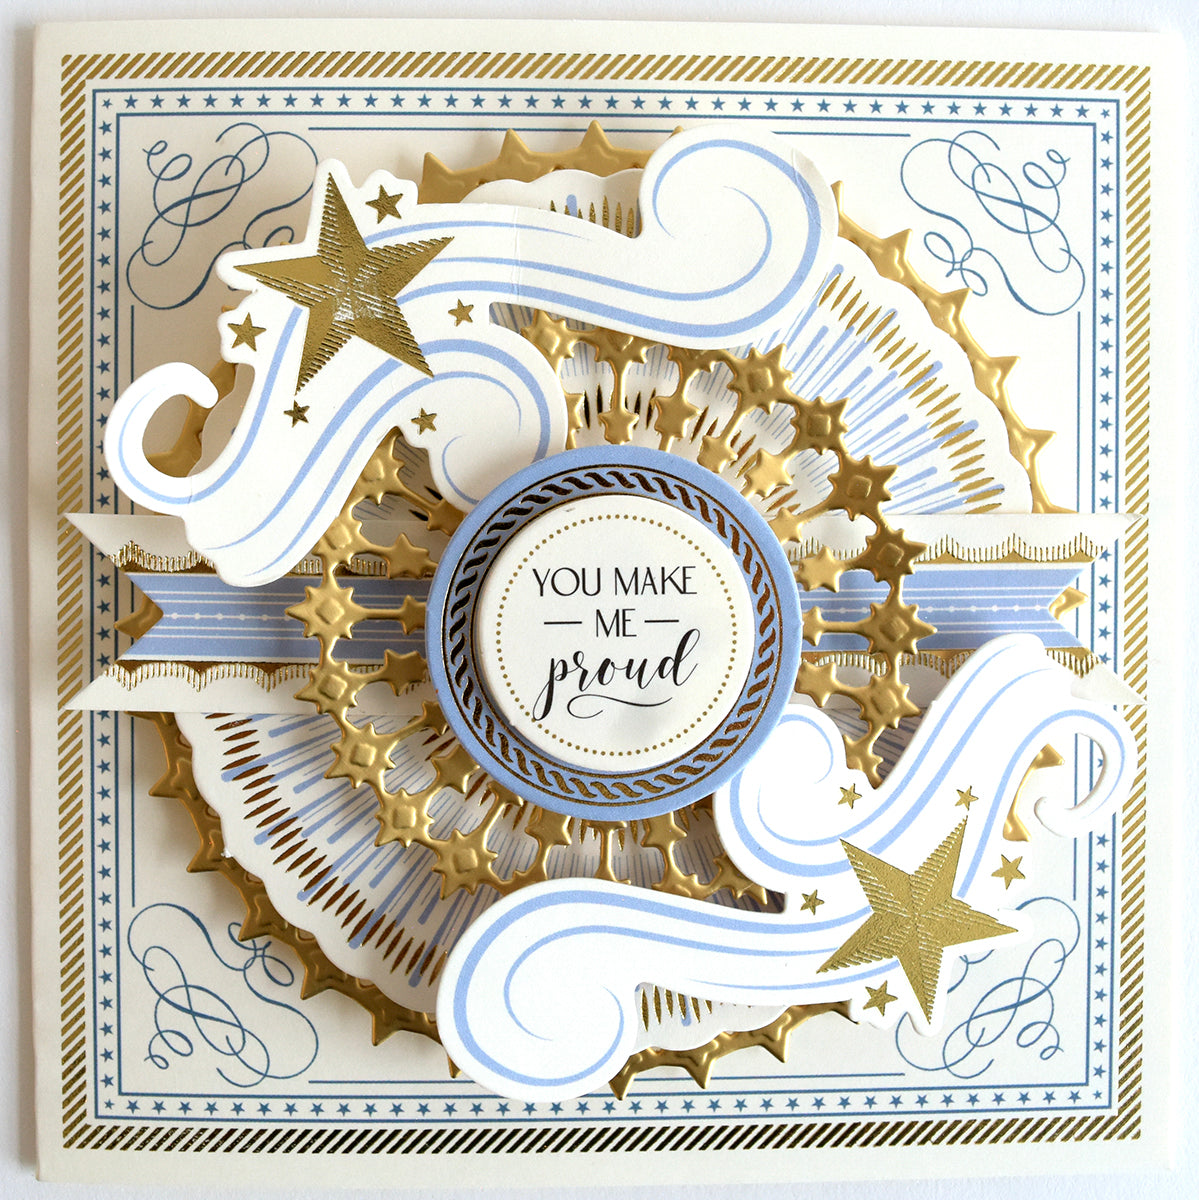 Elaborate 3d paper art card with gears and ribbons in gold and cream, featuring text "you make me proud" encircled at the center, adorned with Celebration Chest Embossing Folder with Dies accents.